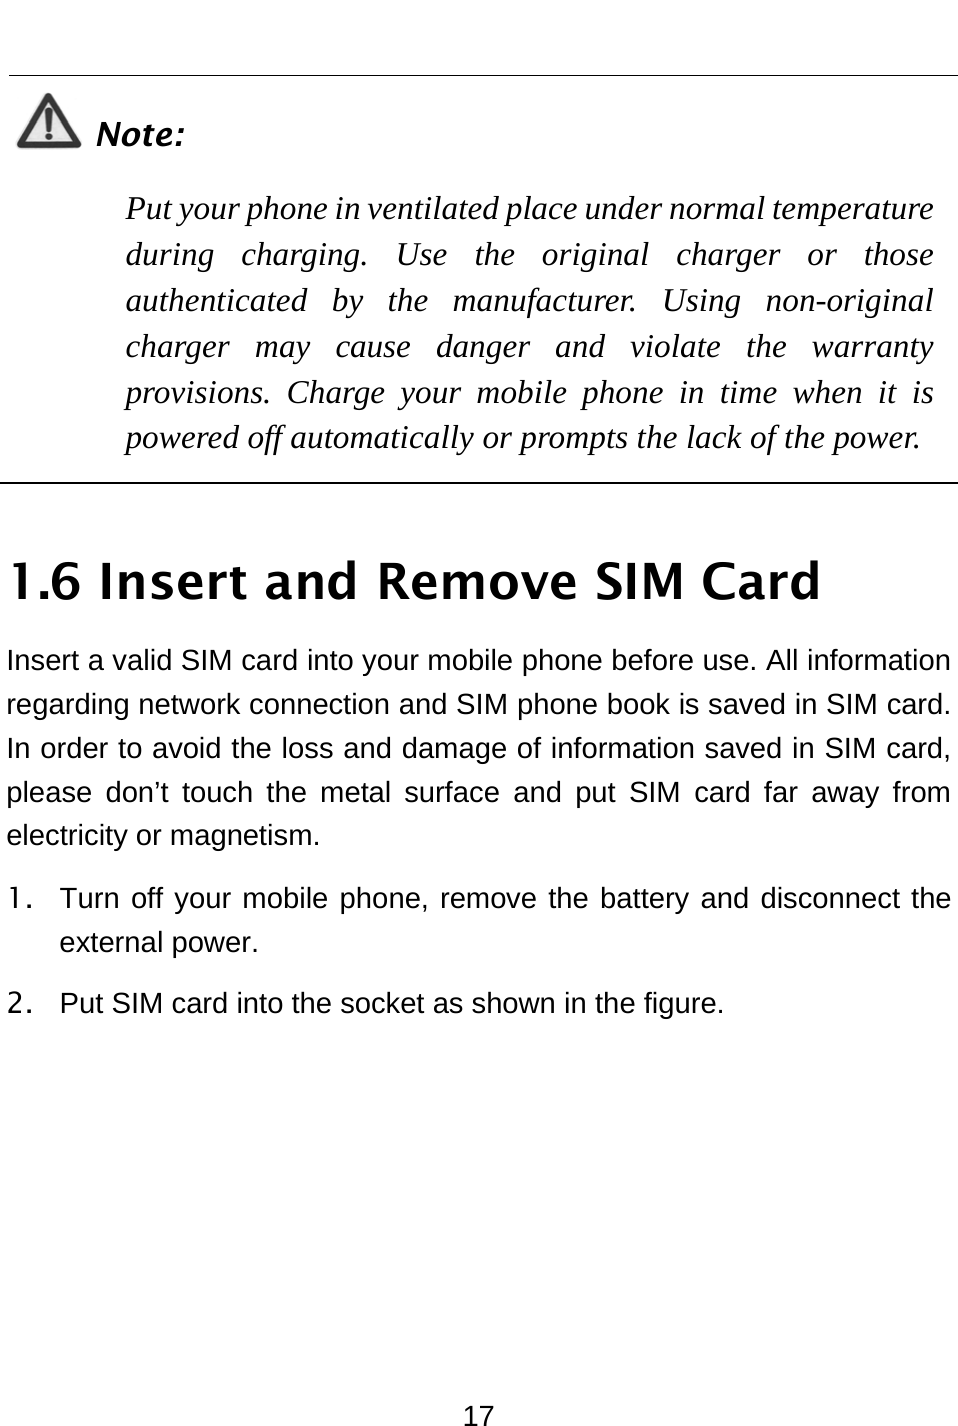  17  Note: Put your phone in ventilated place under normal temperature during charging. Use the original charger or those authenticated by the manufacturer. Using non-original charger may cause danger and violate the warranty provisions. Charge your mobile phone in time when it is powered off automatically or prompts the lack of the power.  1.6 Insert and Remove SIM Card Insert a valid SIM card into your mobile phone before use. All information regarding network connection and SIM phone book is saved in SIM card. In order to avoid the loss and damage of information saved in SIM card, please don’t touch the metal surface and put SIM card far away from electricity or magnetism. 1.  Turn off your mobile phone, remove the battery and disconnect the external power. 2.  Put SIM card into the socket as shown in the figure. 